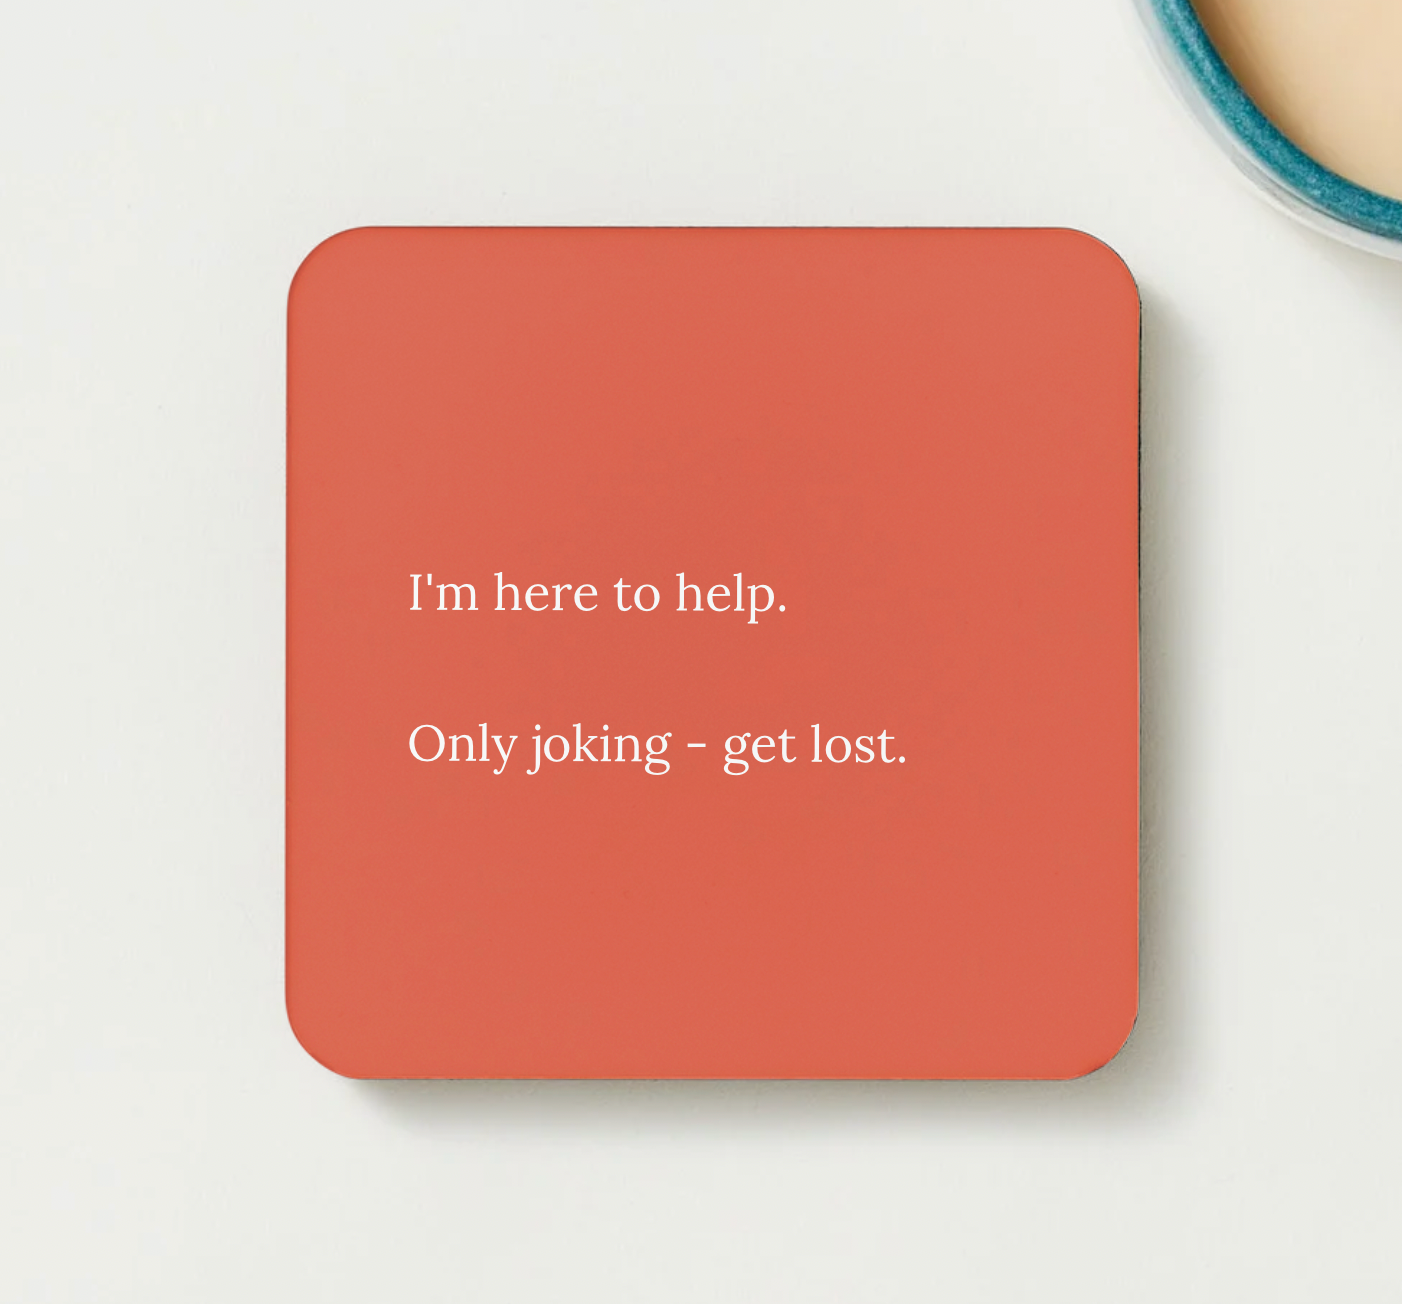 I'm here to help.  Only joking - get lost - funny coaster